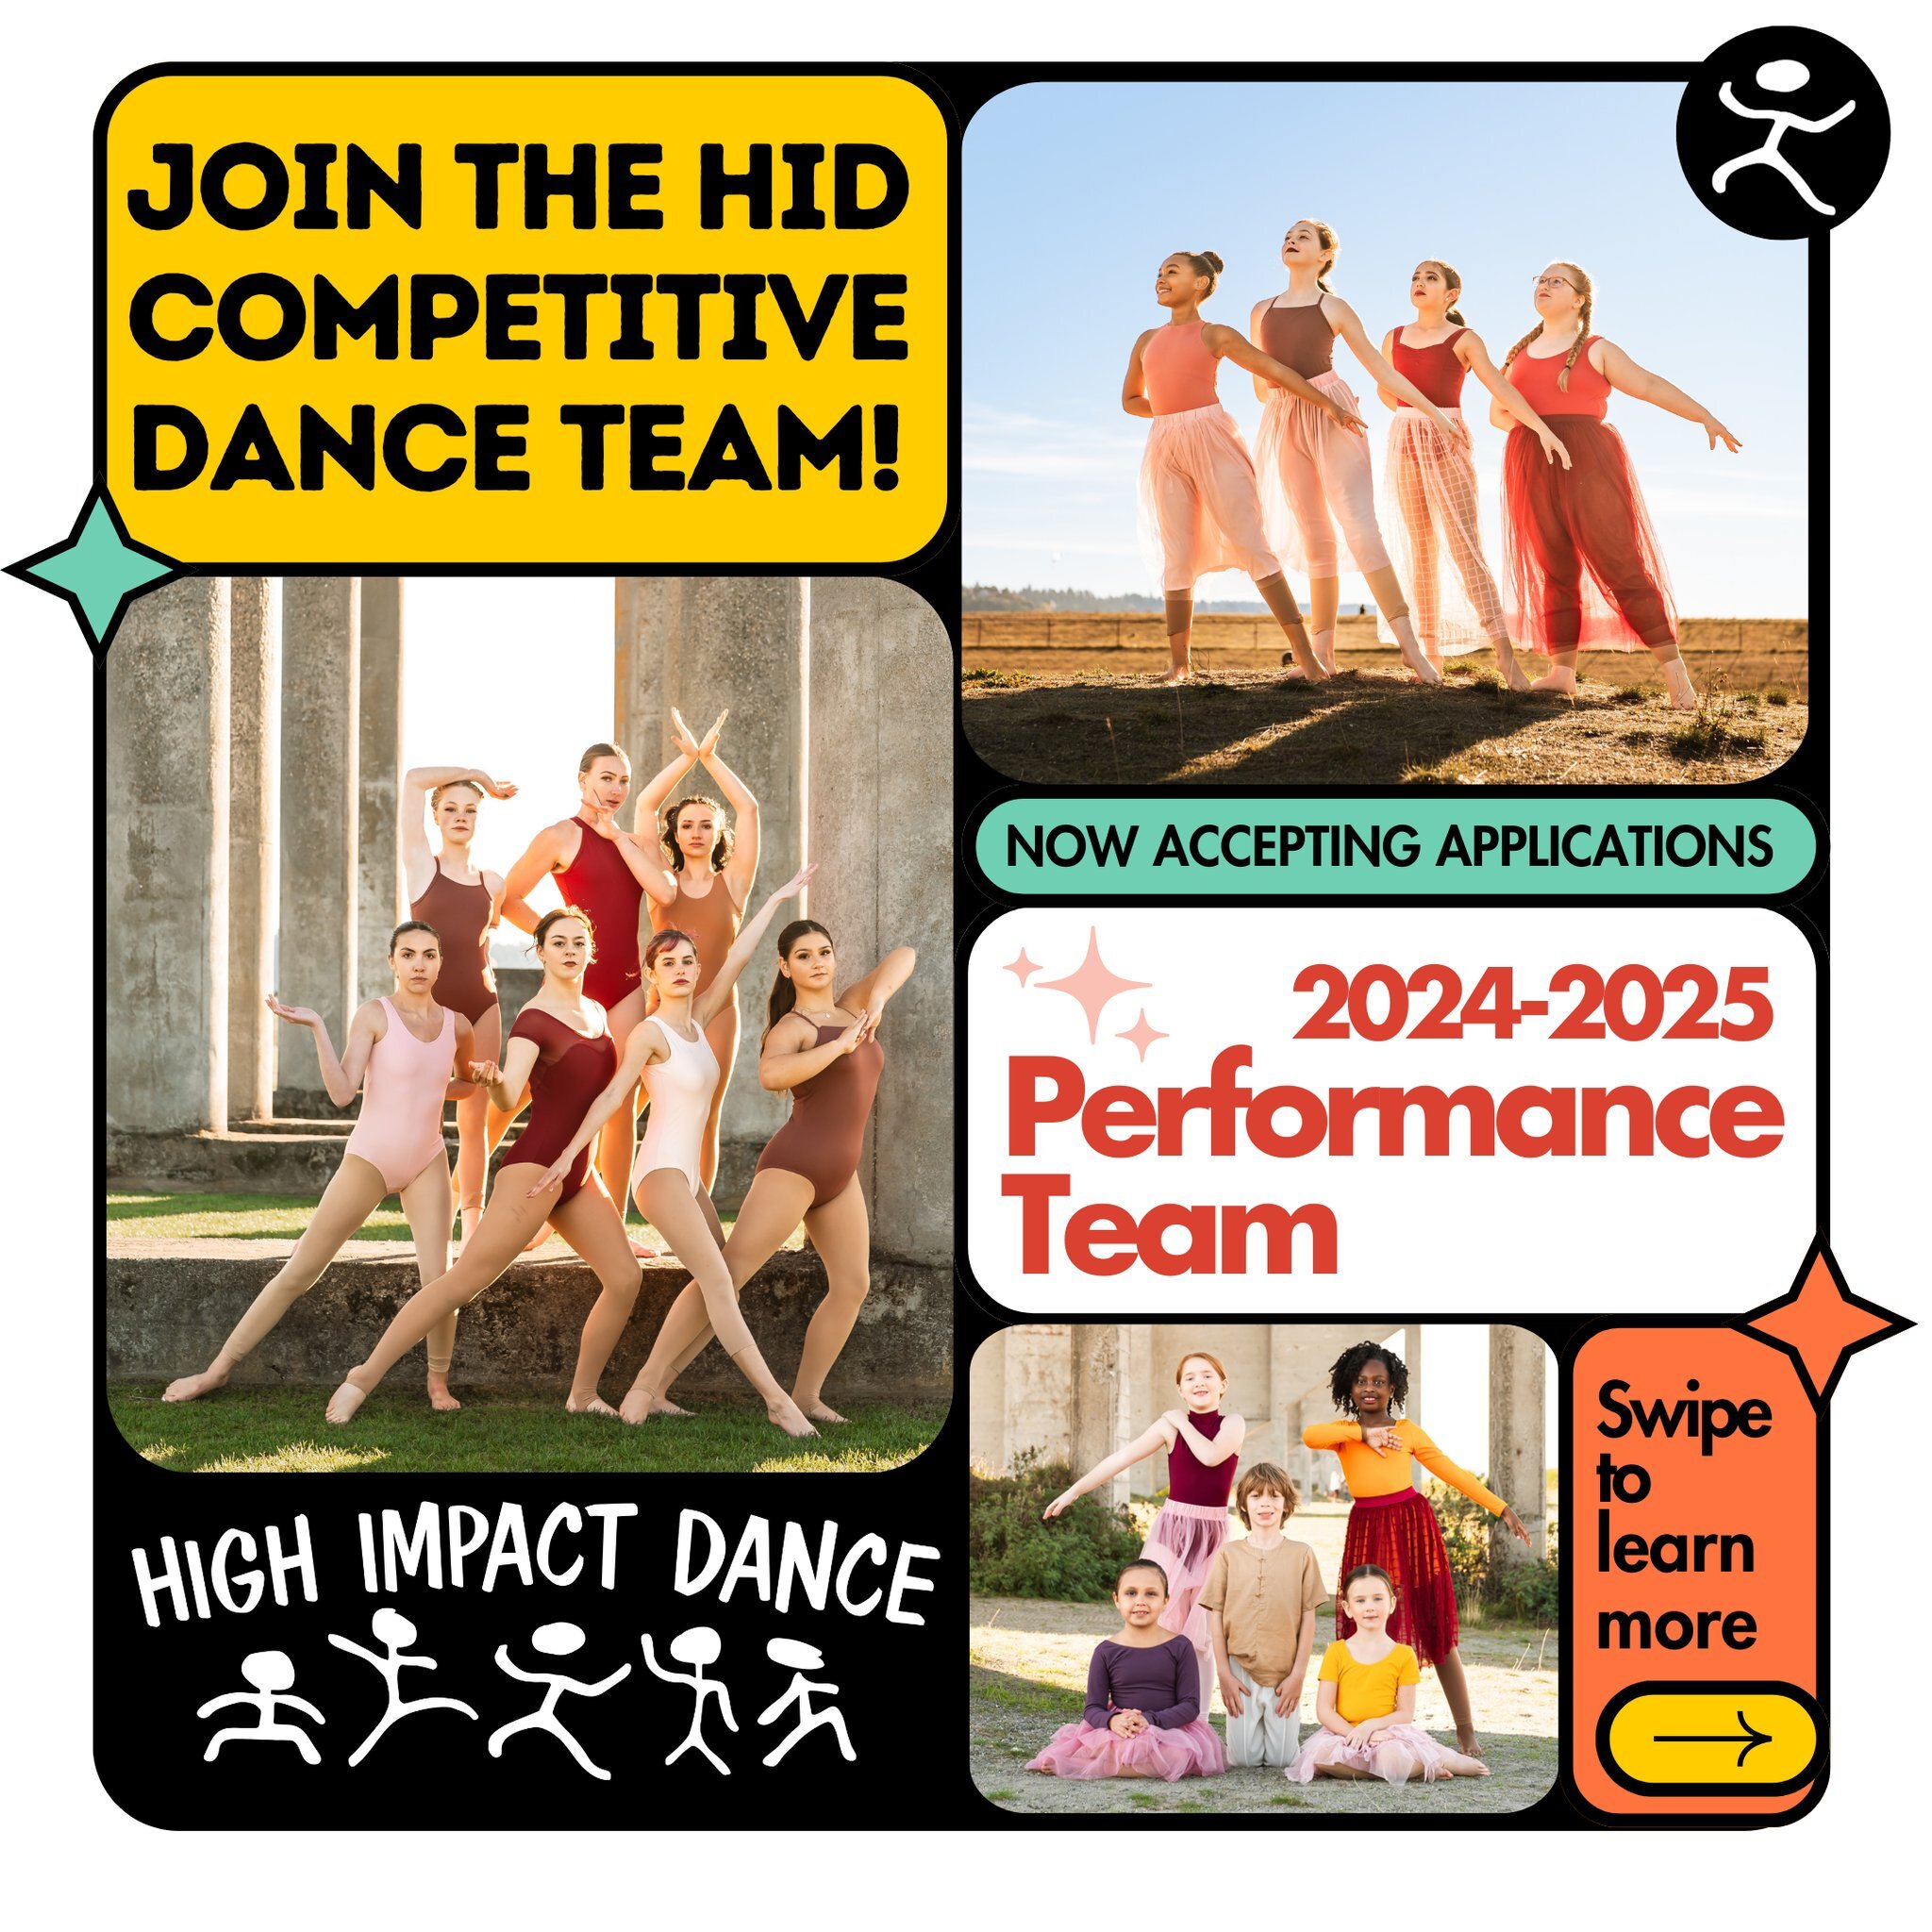 🌟 Apply to join the High Impact Dance 2024-2025 Performance Team! 🌟 Applications are now available. Click the link in bio to apply today!

🚨 NEW!🚨 This year, our Performance Team dancers have more flexibility than before! Whether you're aiming fo